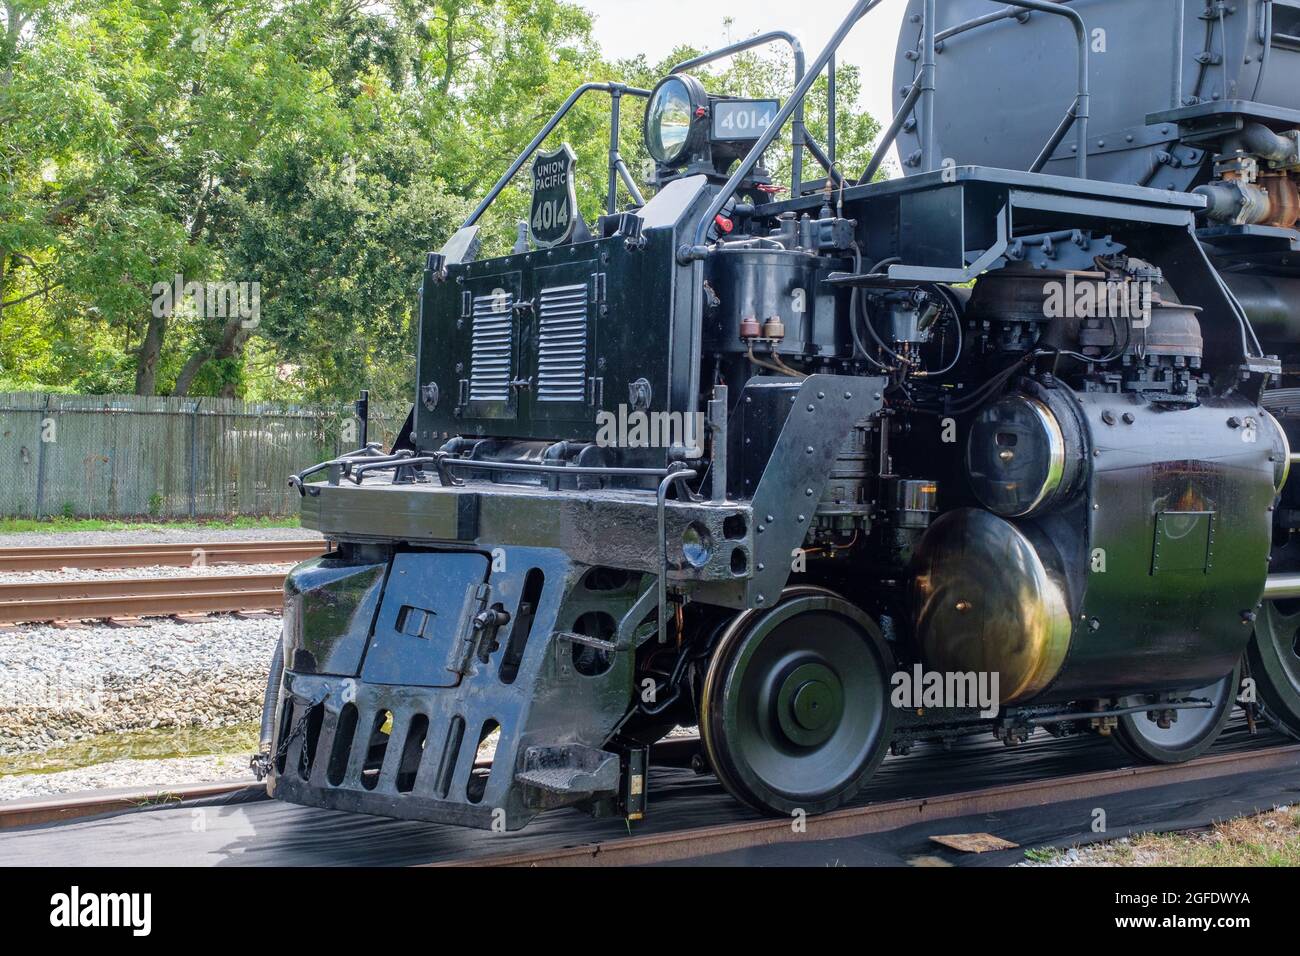 NEW ORLEANS, LA, USA - AUGUST 21, 2021: Front of Big Boy 4014 steam locomotive during its tour stop in Uptown New Orleans Stock Photo